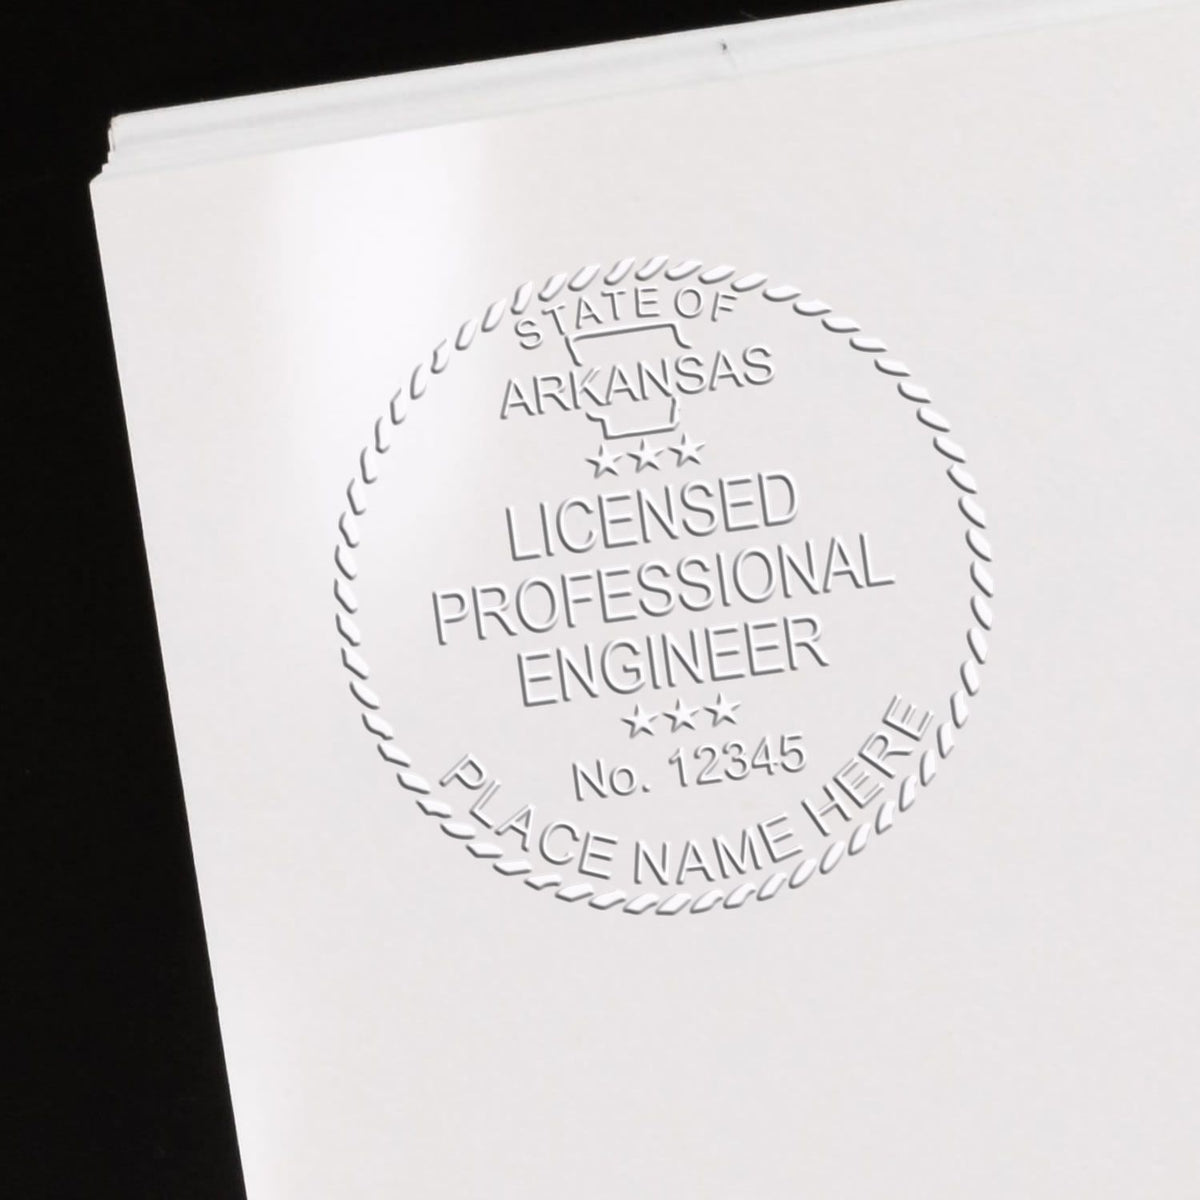 The Gift Arkansas Engineer Seal stamp impression comes to life with a crisp, detailed image stamped on paper - showcasing true professional quality.